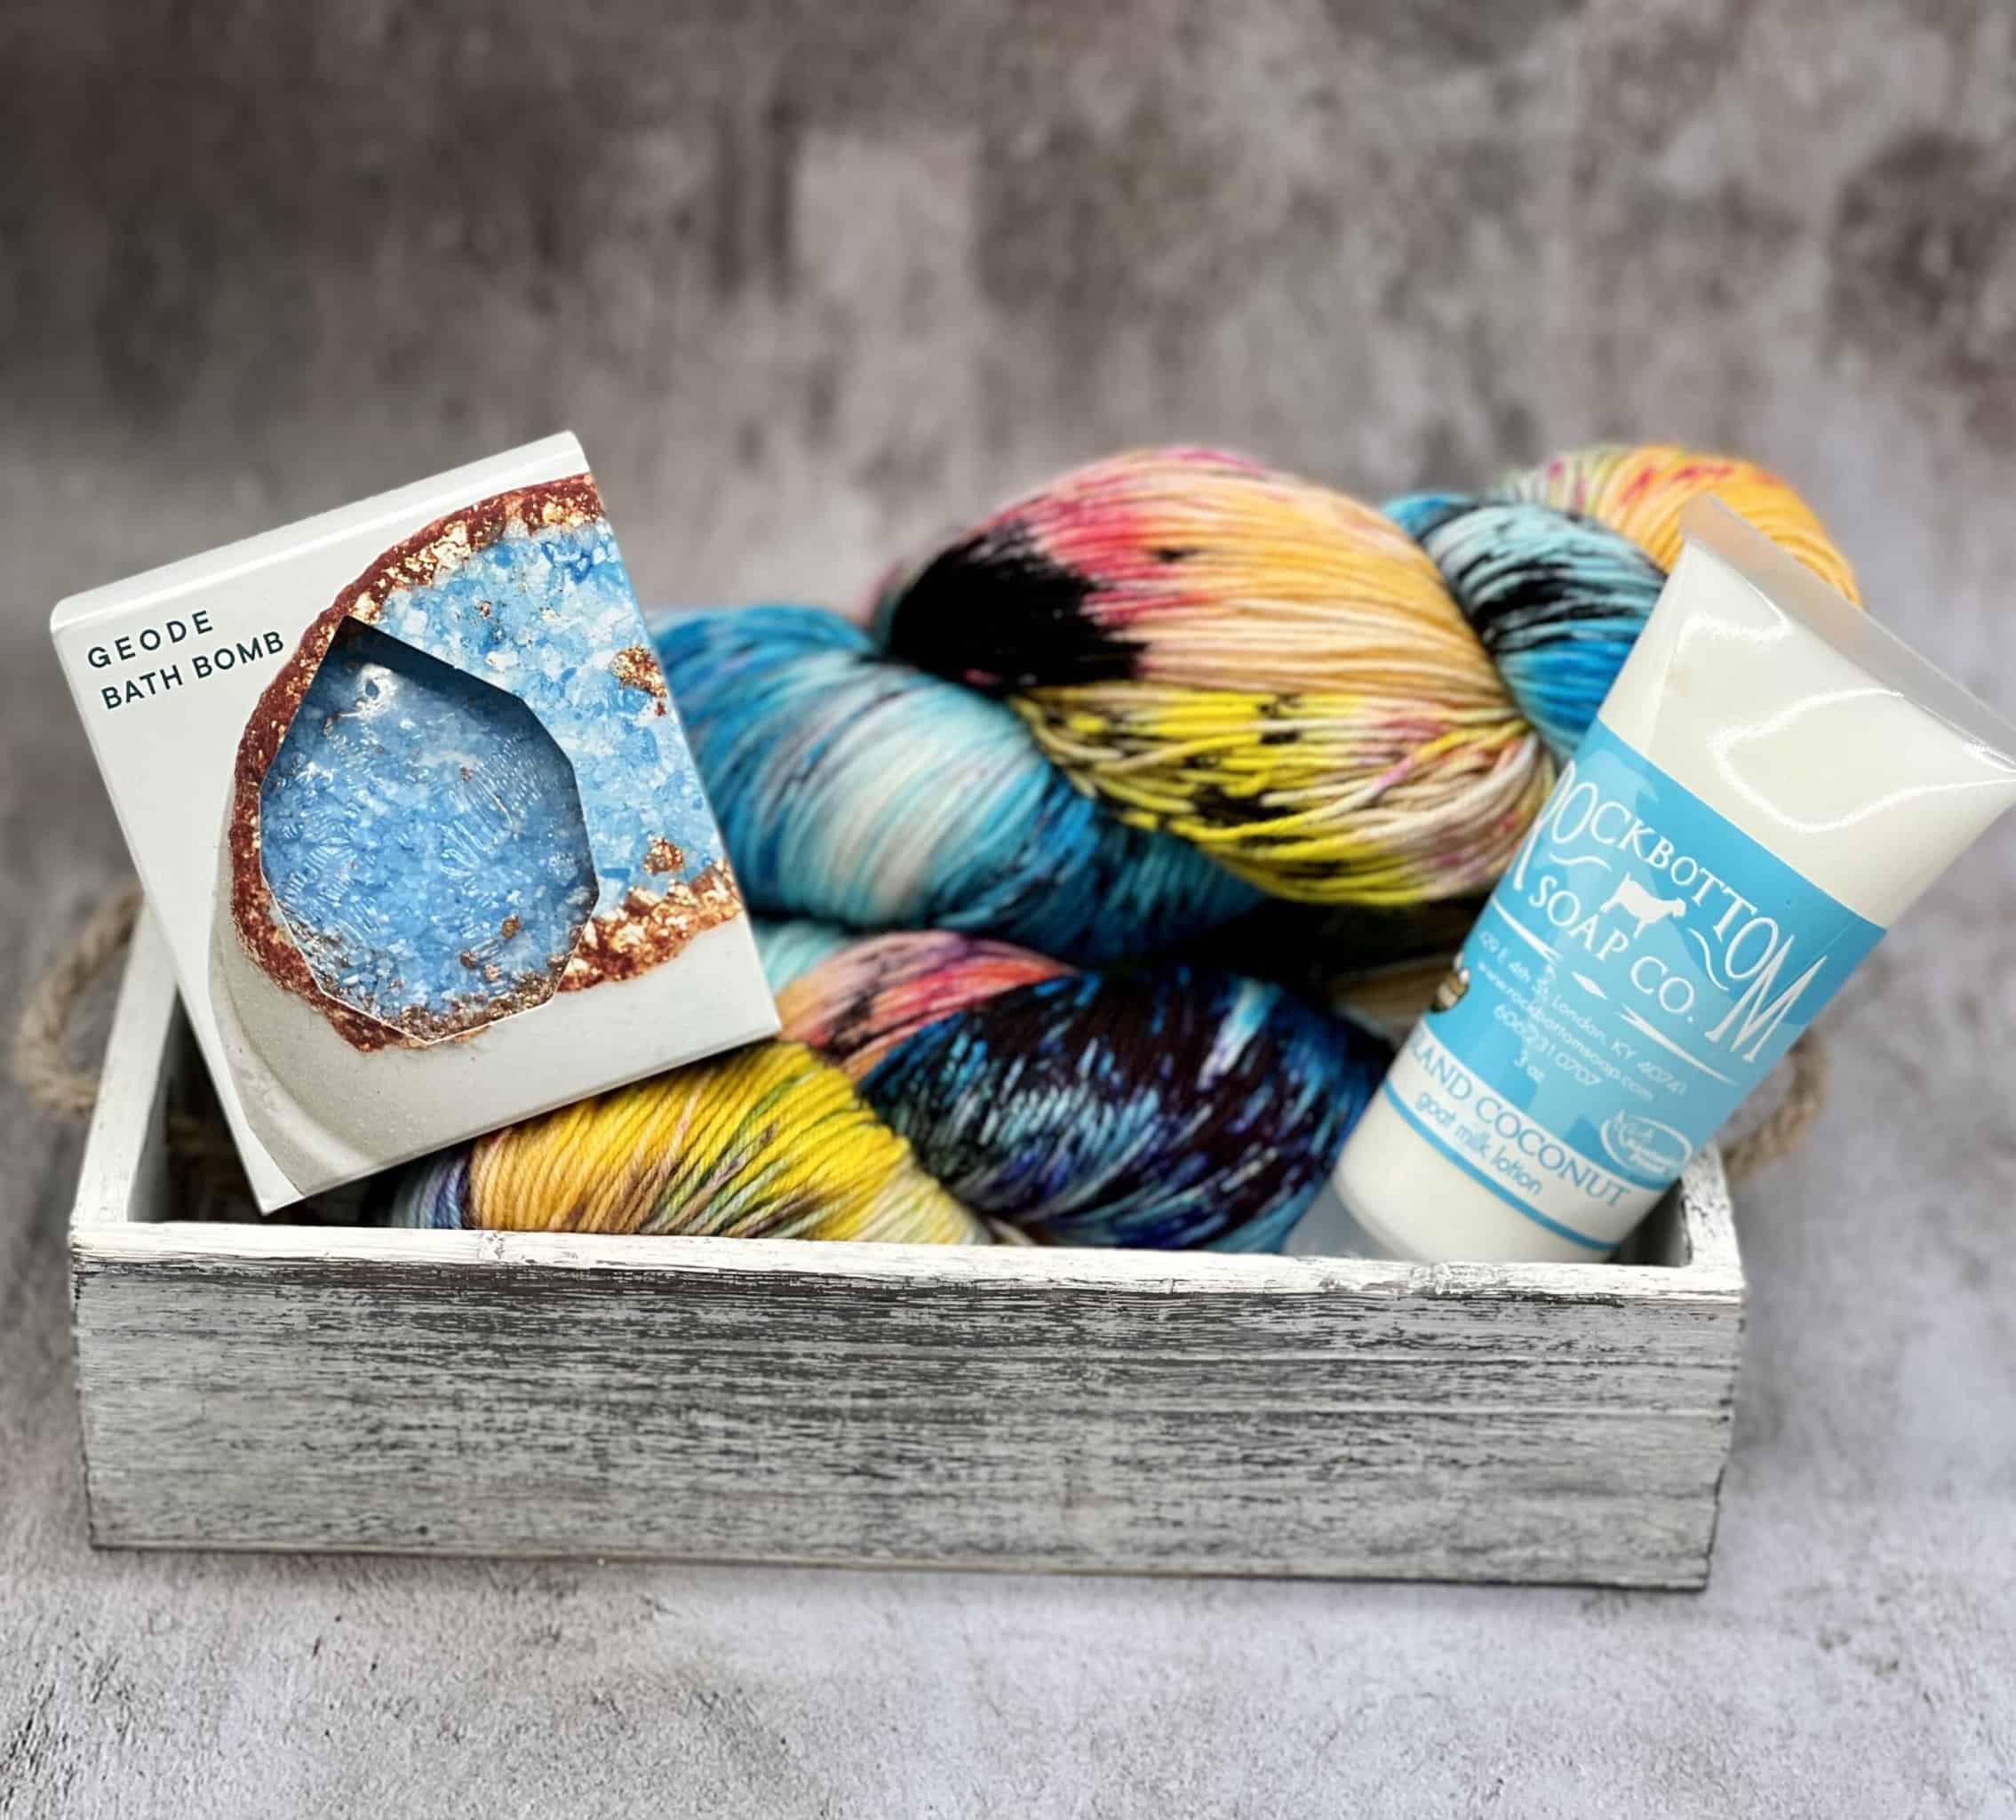 A skein of yarn in blue, yellow, red and black with a blue bath bomb and coconut lotion in a white wooden box.